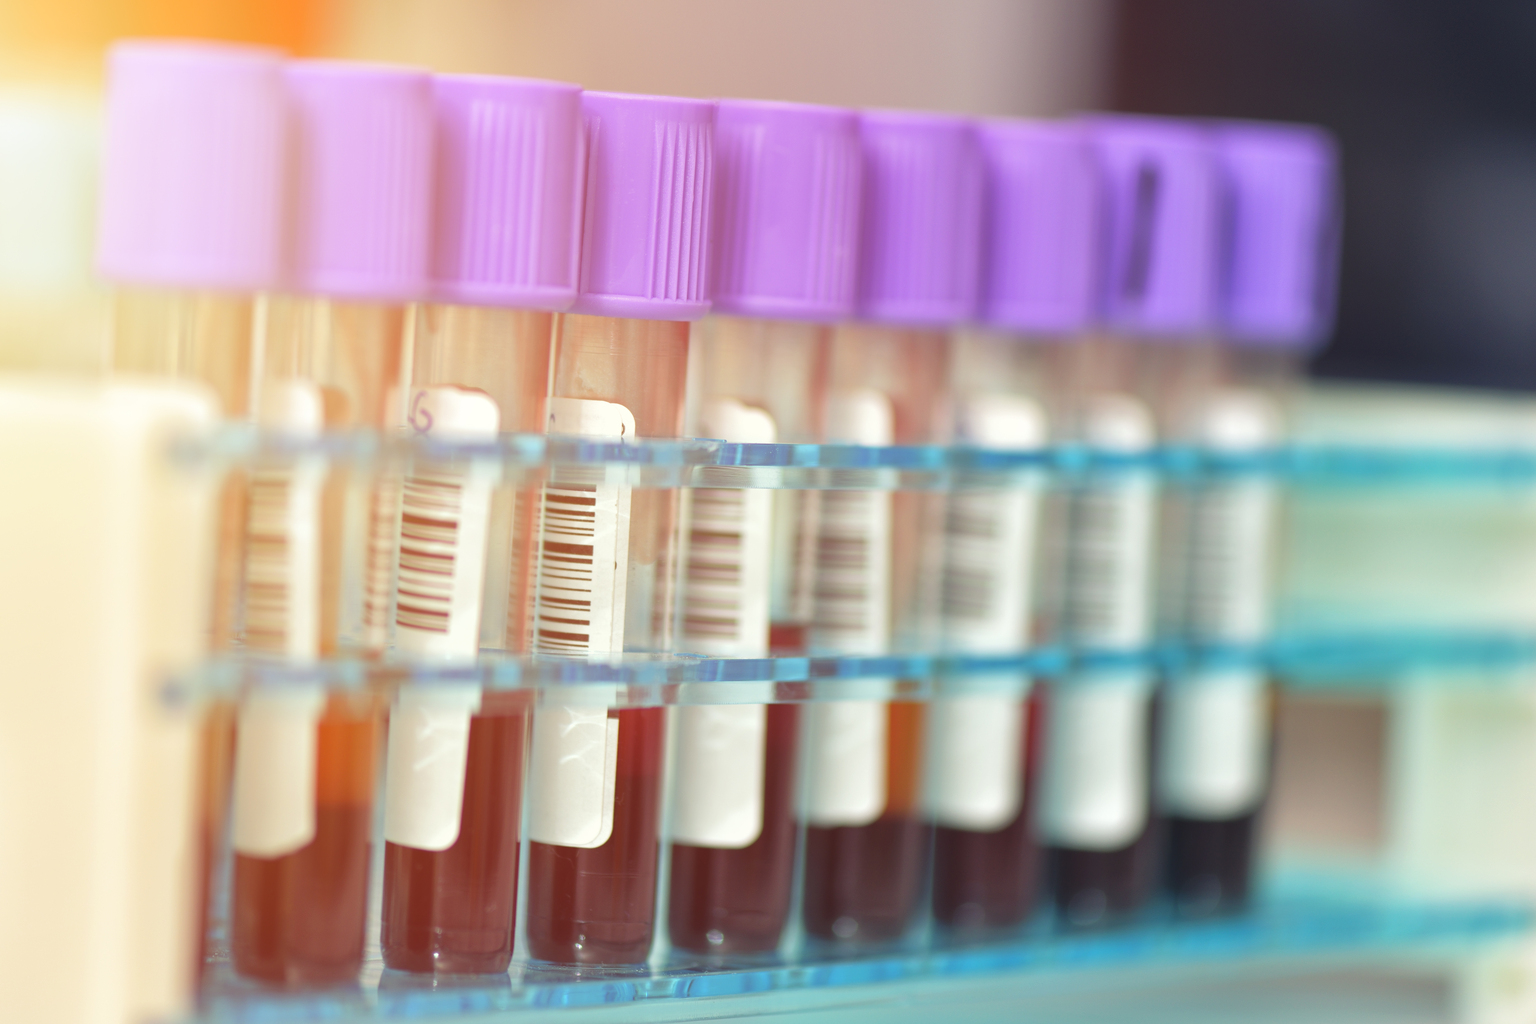 Your patient receives an abnormal lab result. Now what?